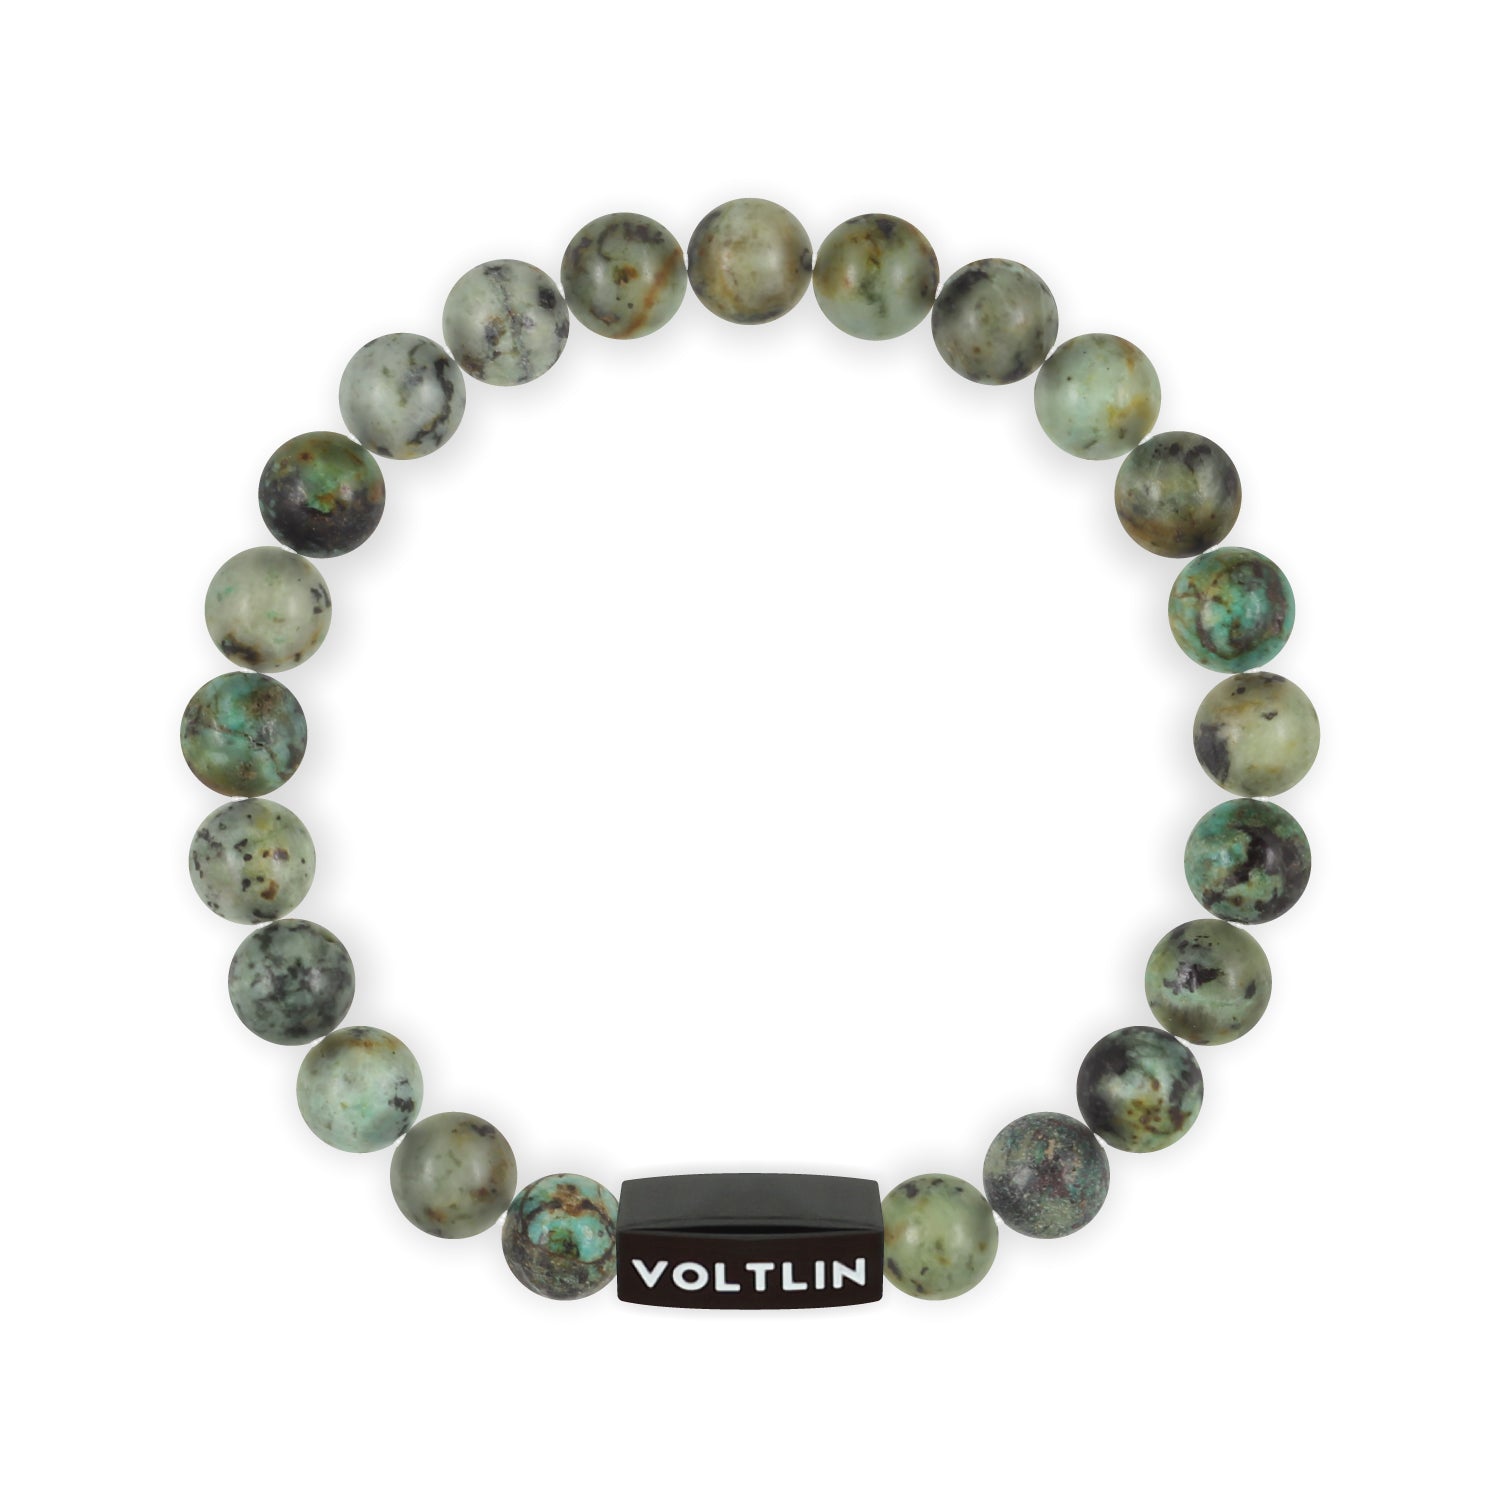 Front view of an 8mm African Turquoise crystal beaded stretch bracelet with black stainless steel logo bead made by Voltlin